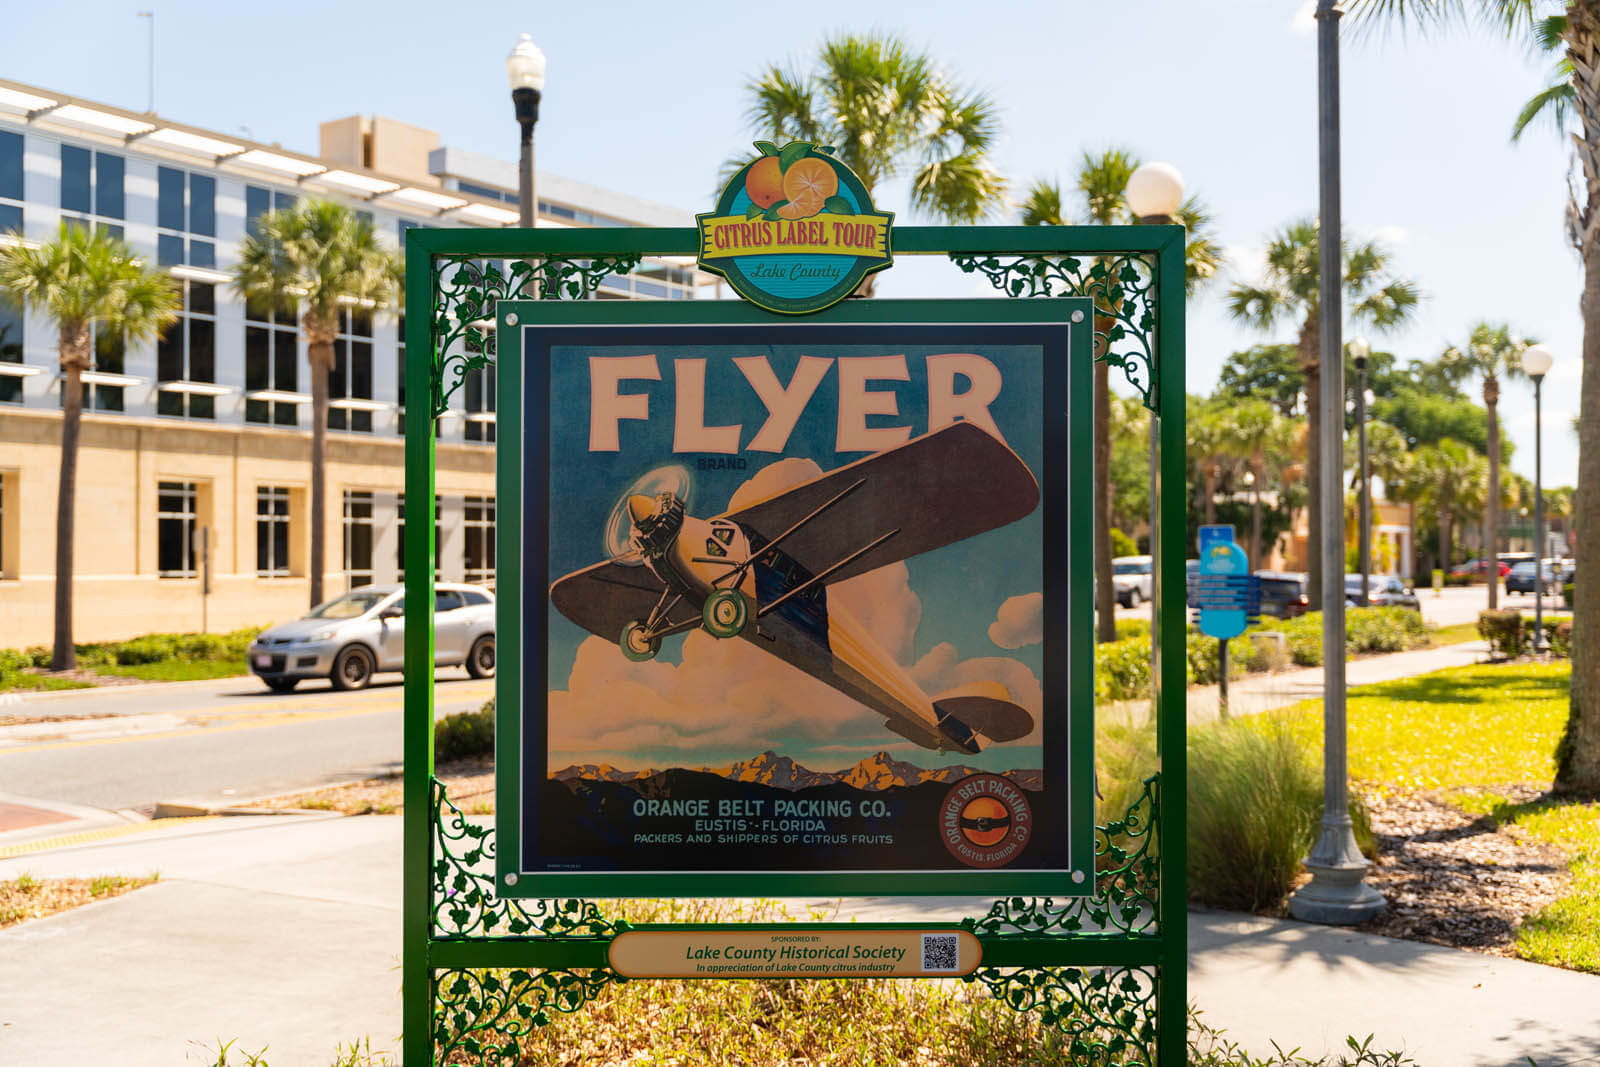 vintage seaplane citrus label sign outside the lake county museum in tavares florida